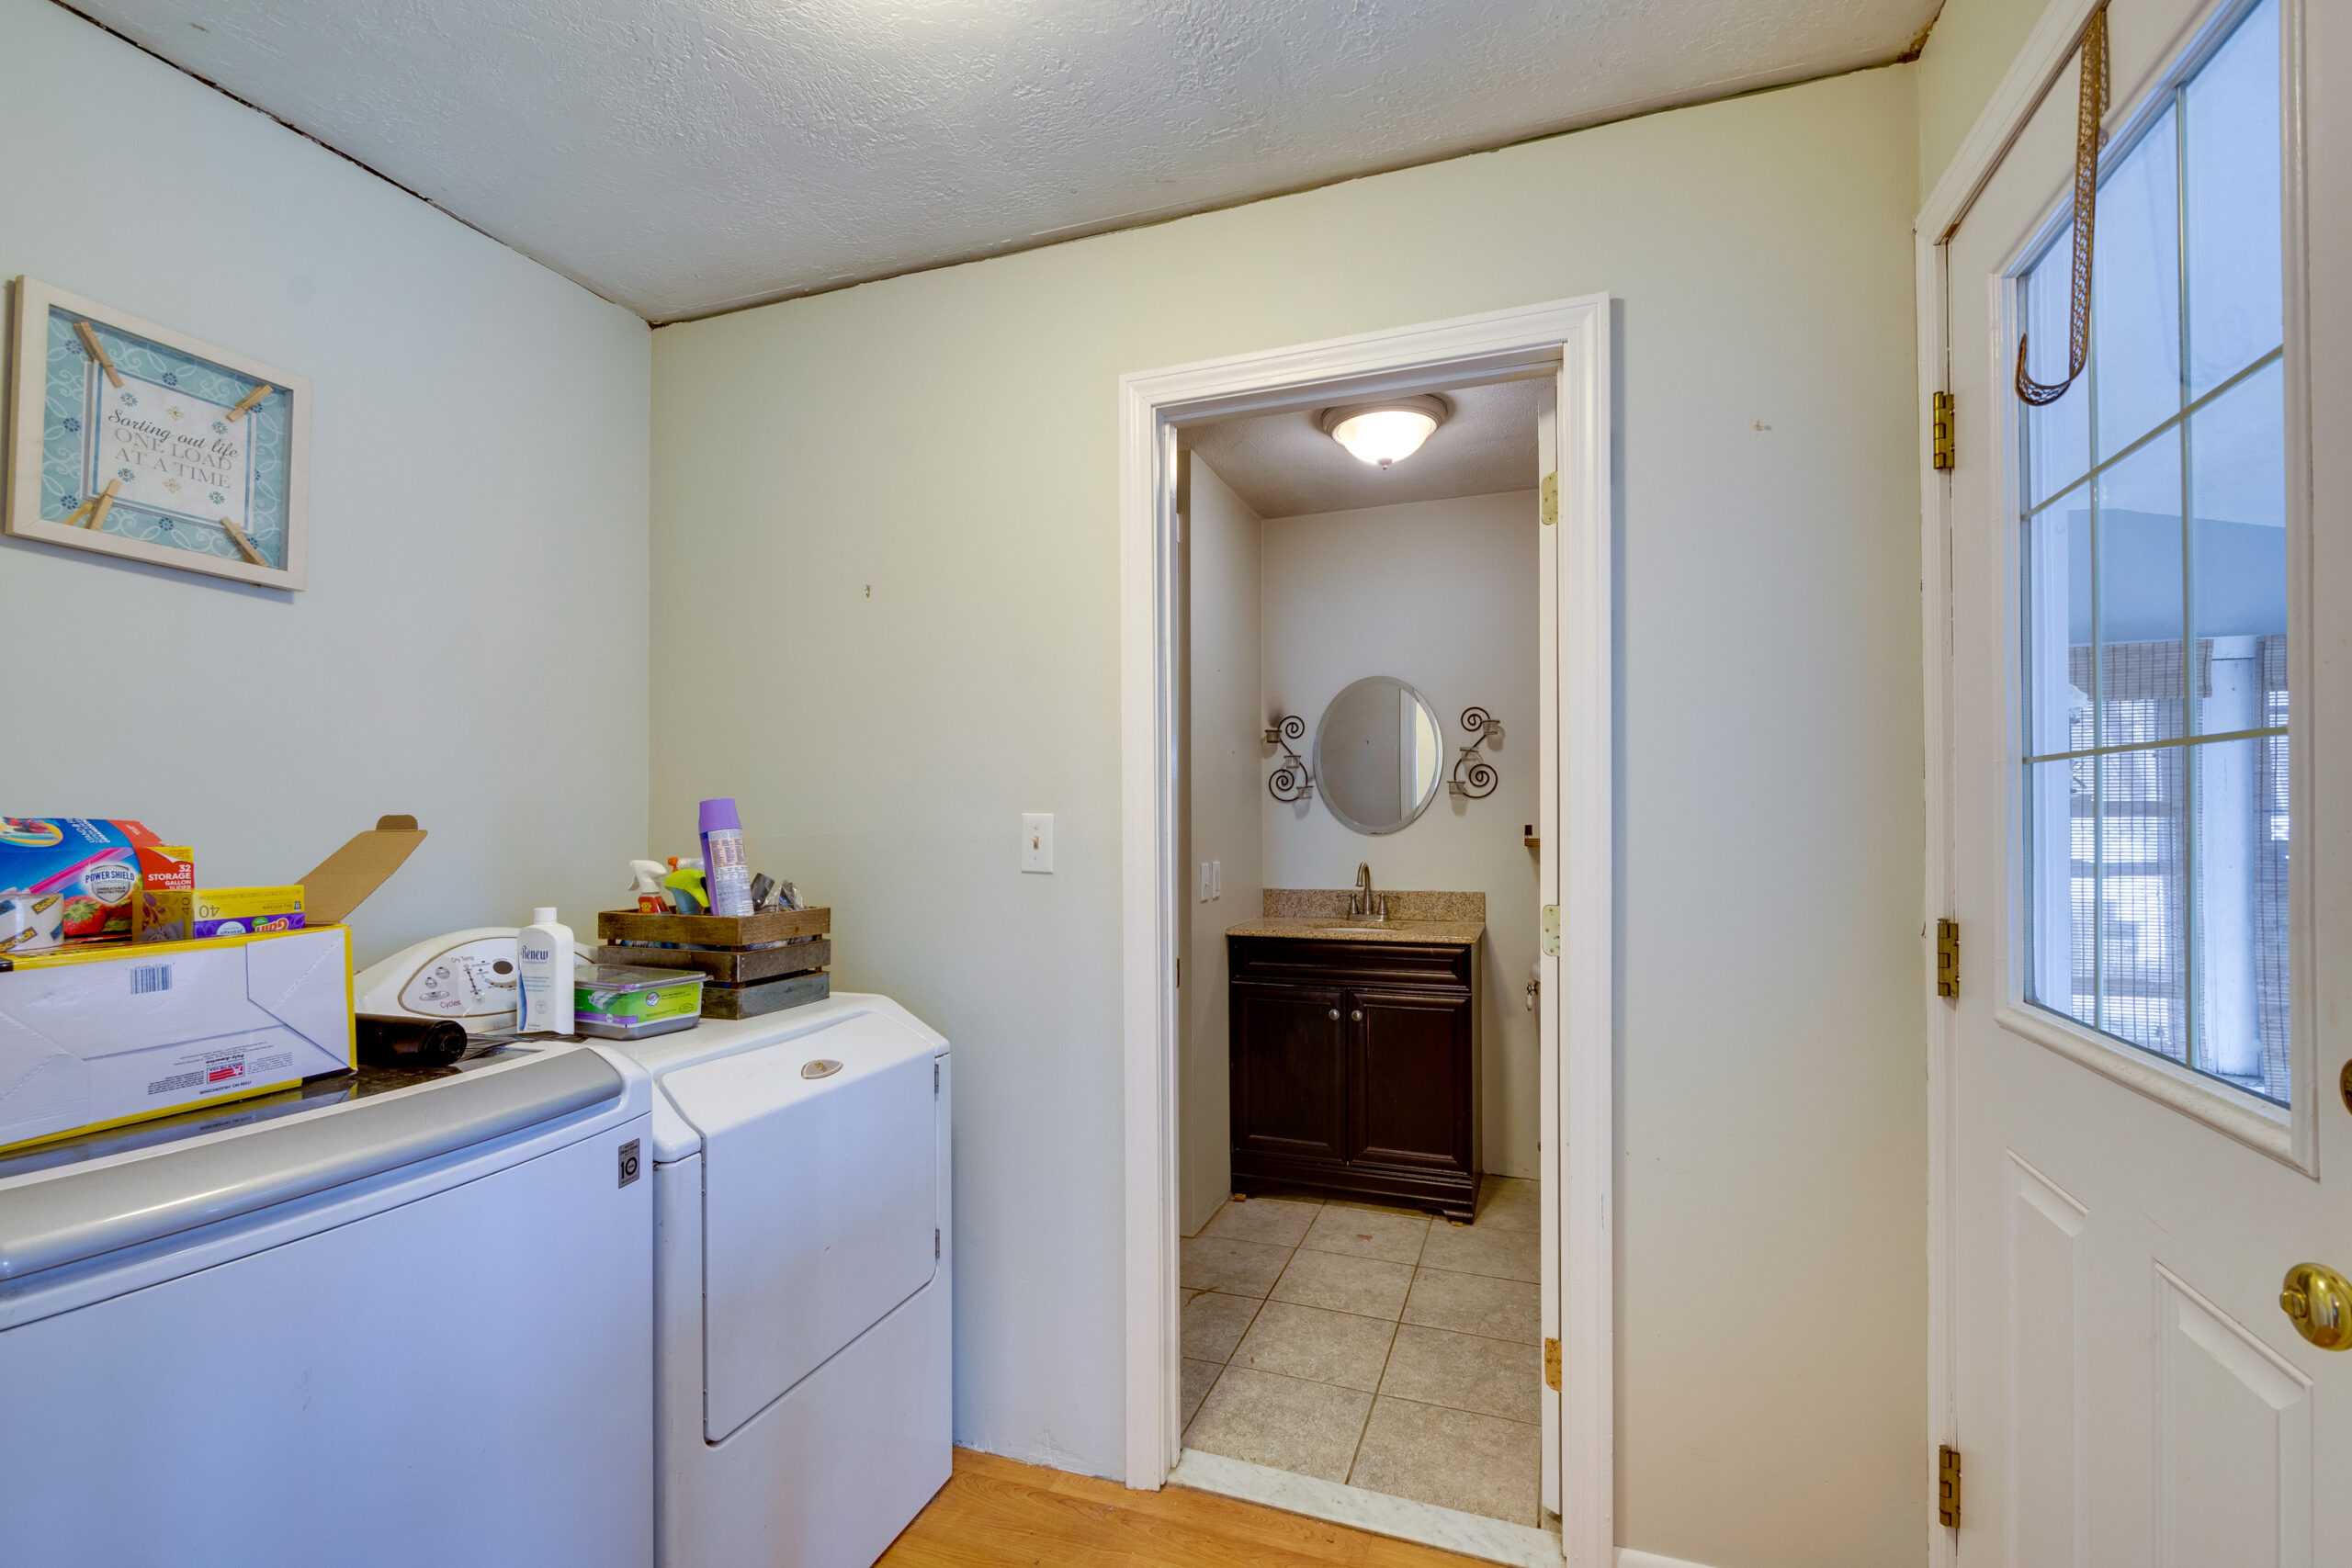 Before image of a laundry room in a vintage New England home showing outdated appliances and cluttered space prior to renovation